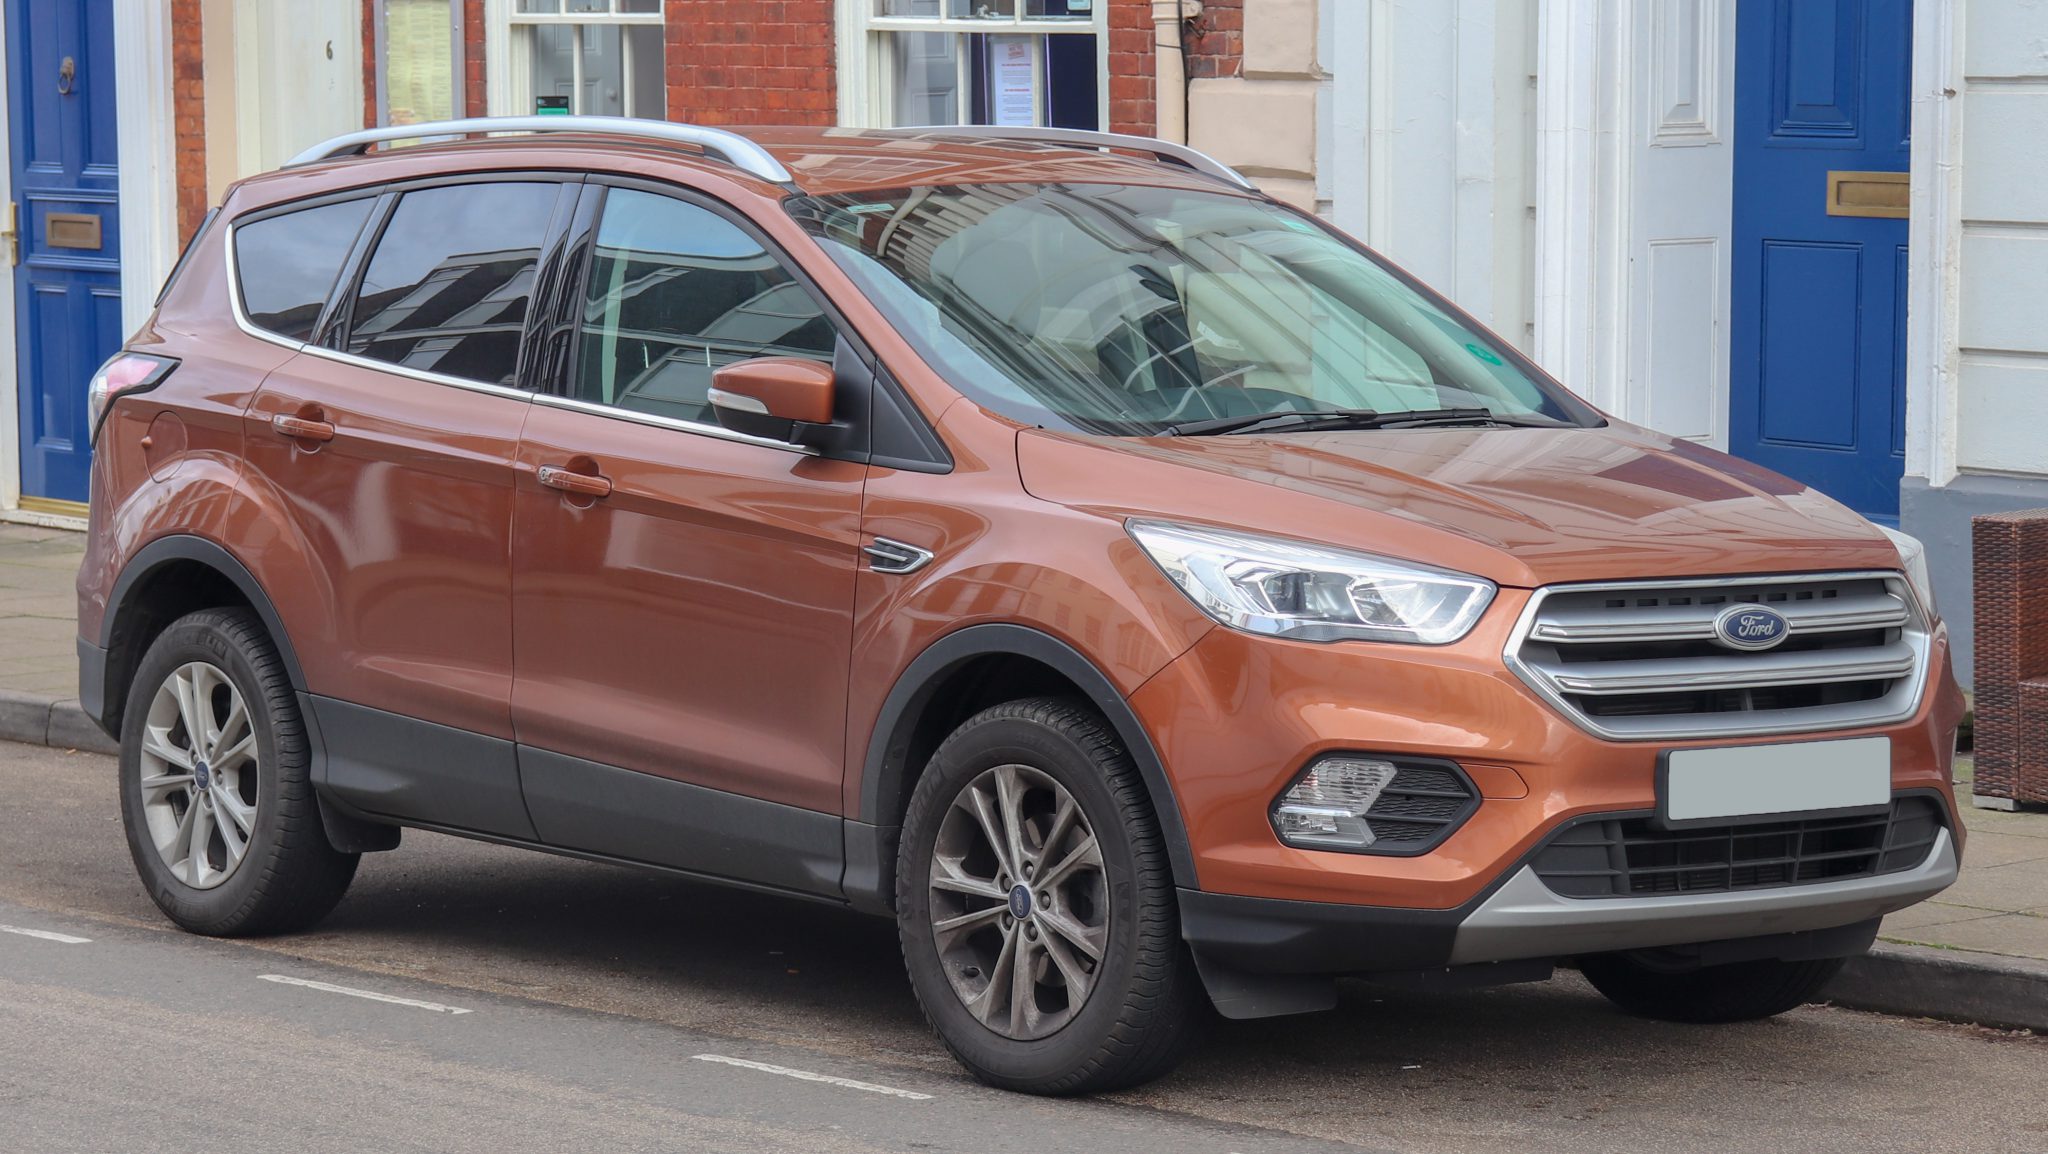 Ford-Kuga-with-new-windscreen-replacement